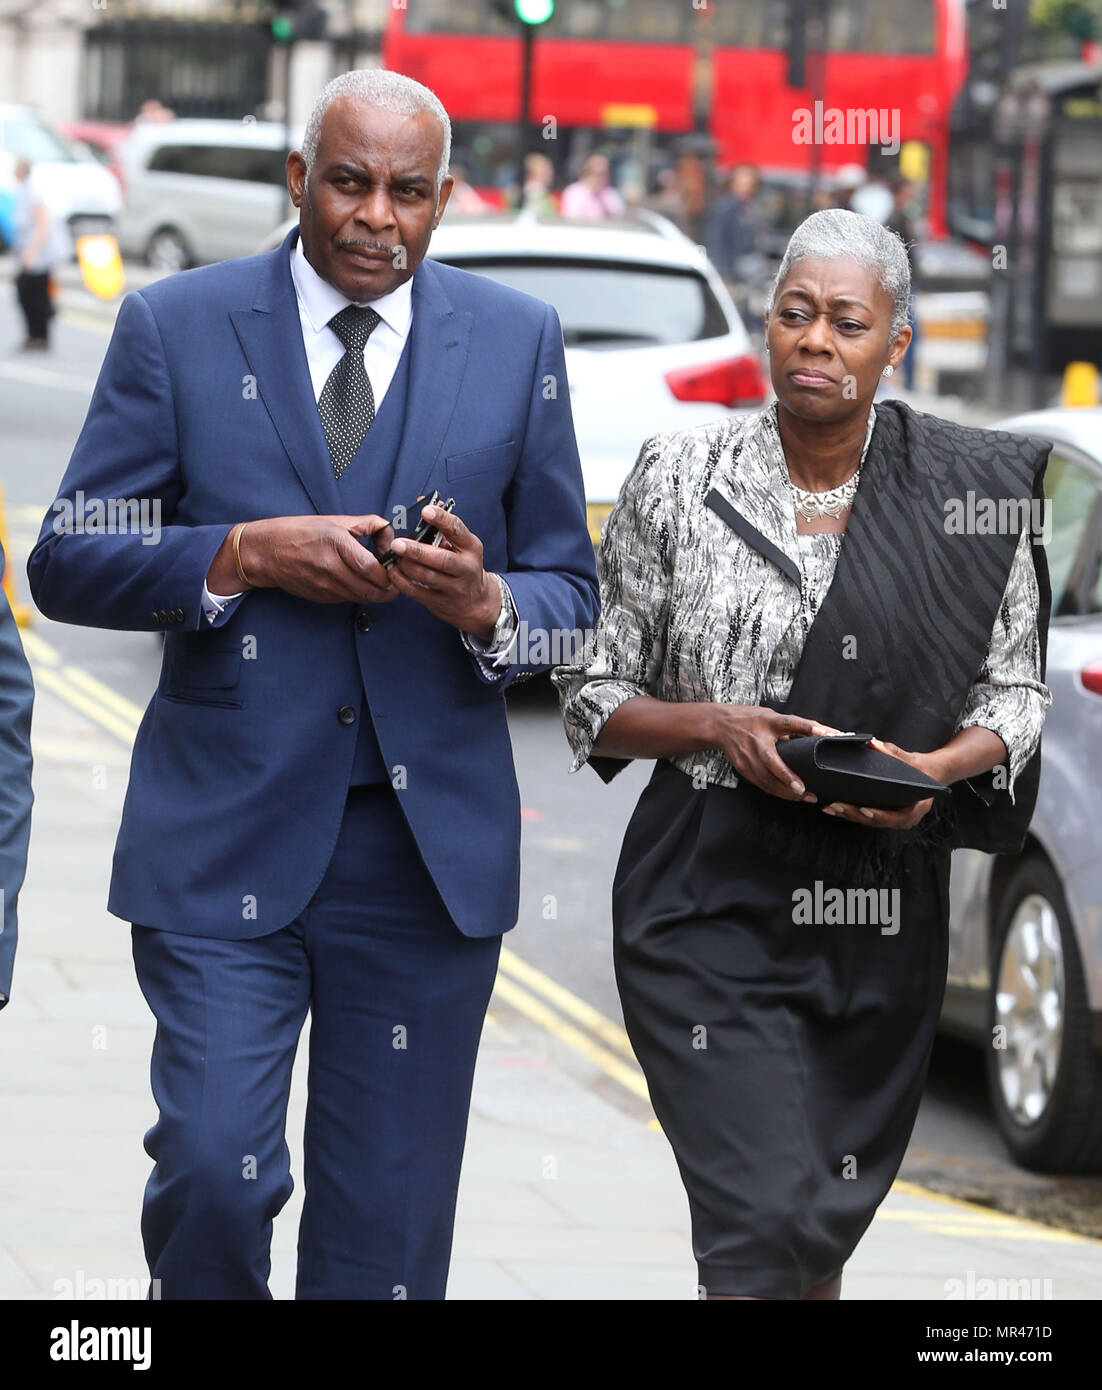 Stephen Lawrence memorial service St Martin-in-the-Fields Church, Trafalgar Square, London.  Featuring: Neville Lawrence and his family Where: London, United Kingdom When: 23 Apr 2018 Credit: Danny Martindale/WENN Stock Photo